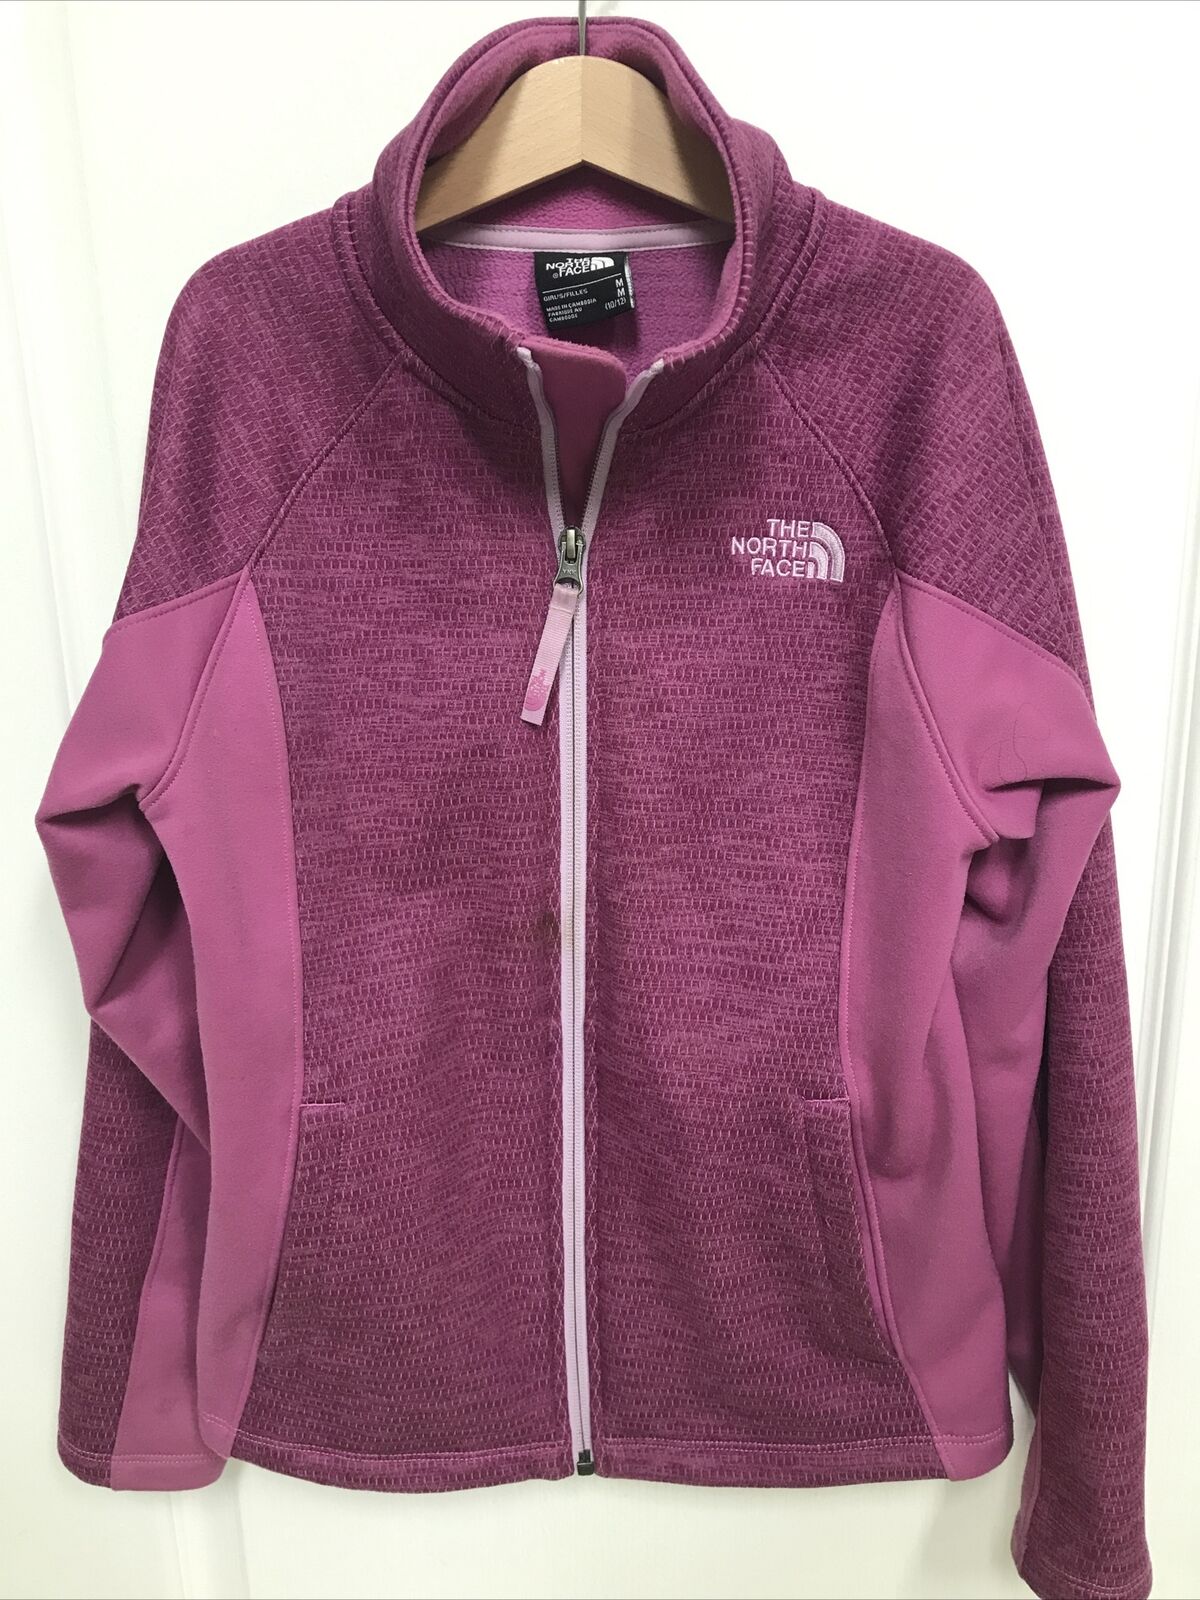 The North Face Jacket Girl Size M (10/12)